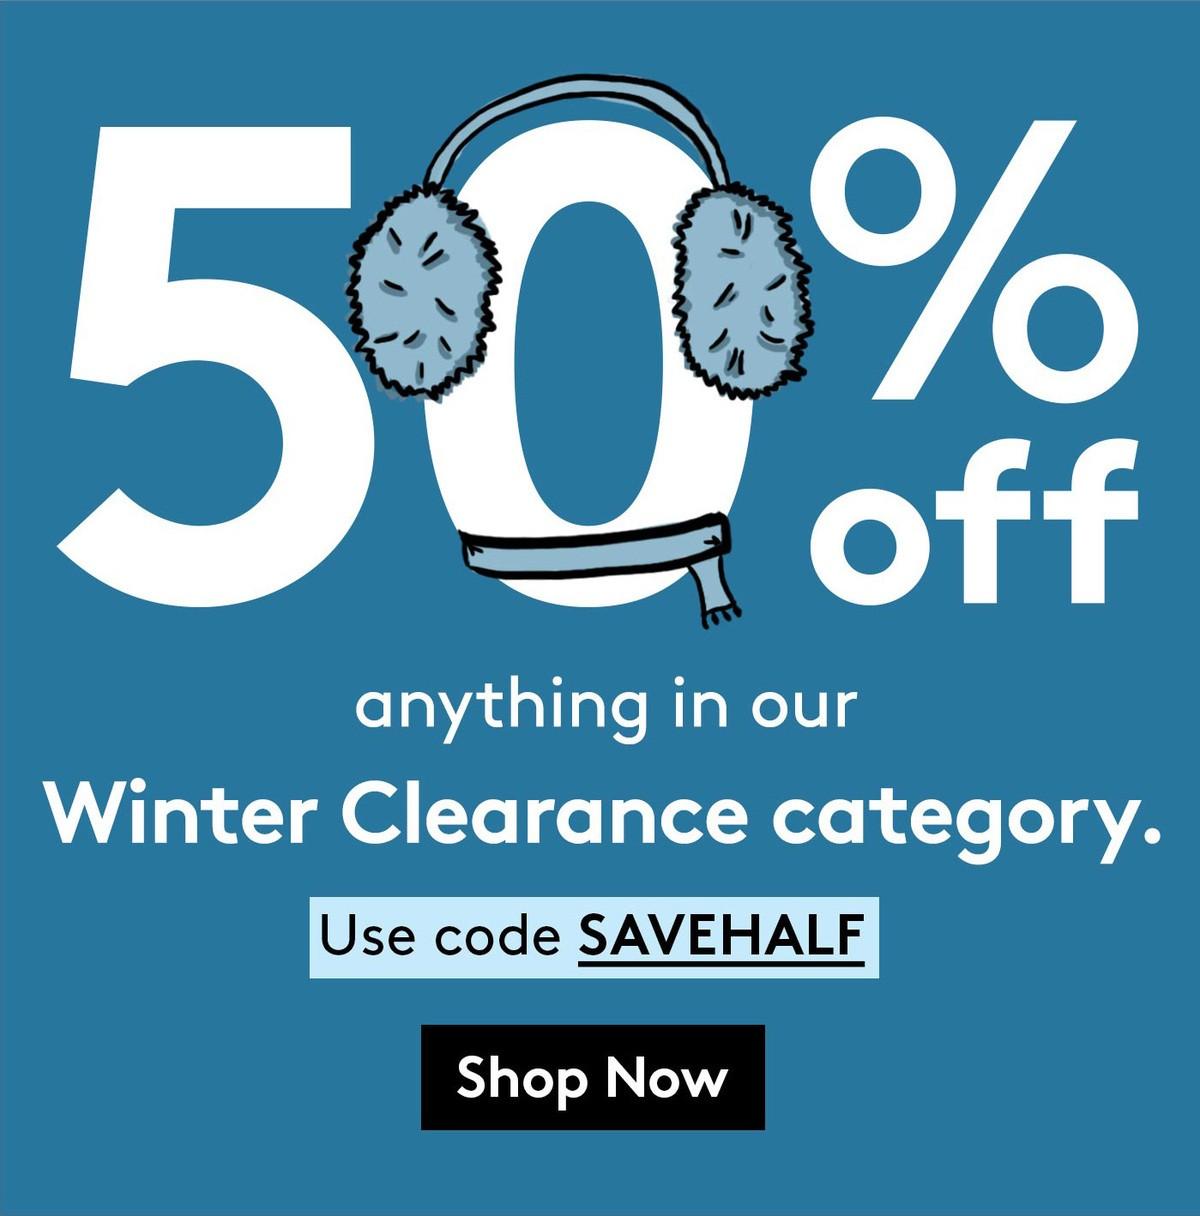 Last Day! Birchbox Winter Clearance Sale – Save 50% Off!